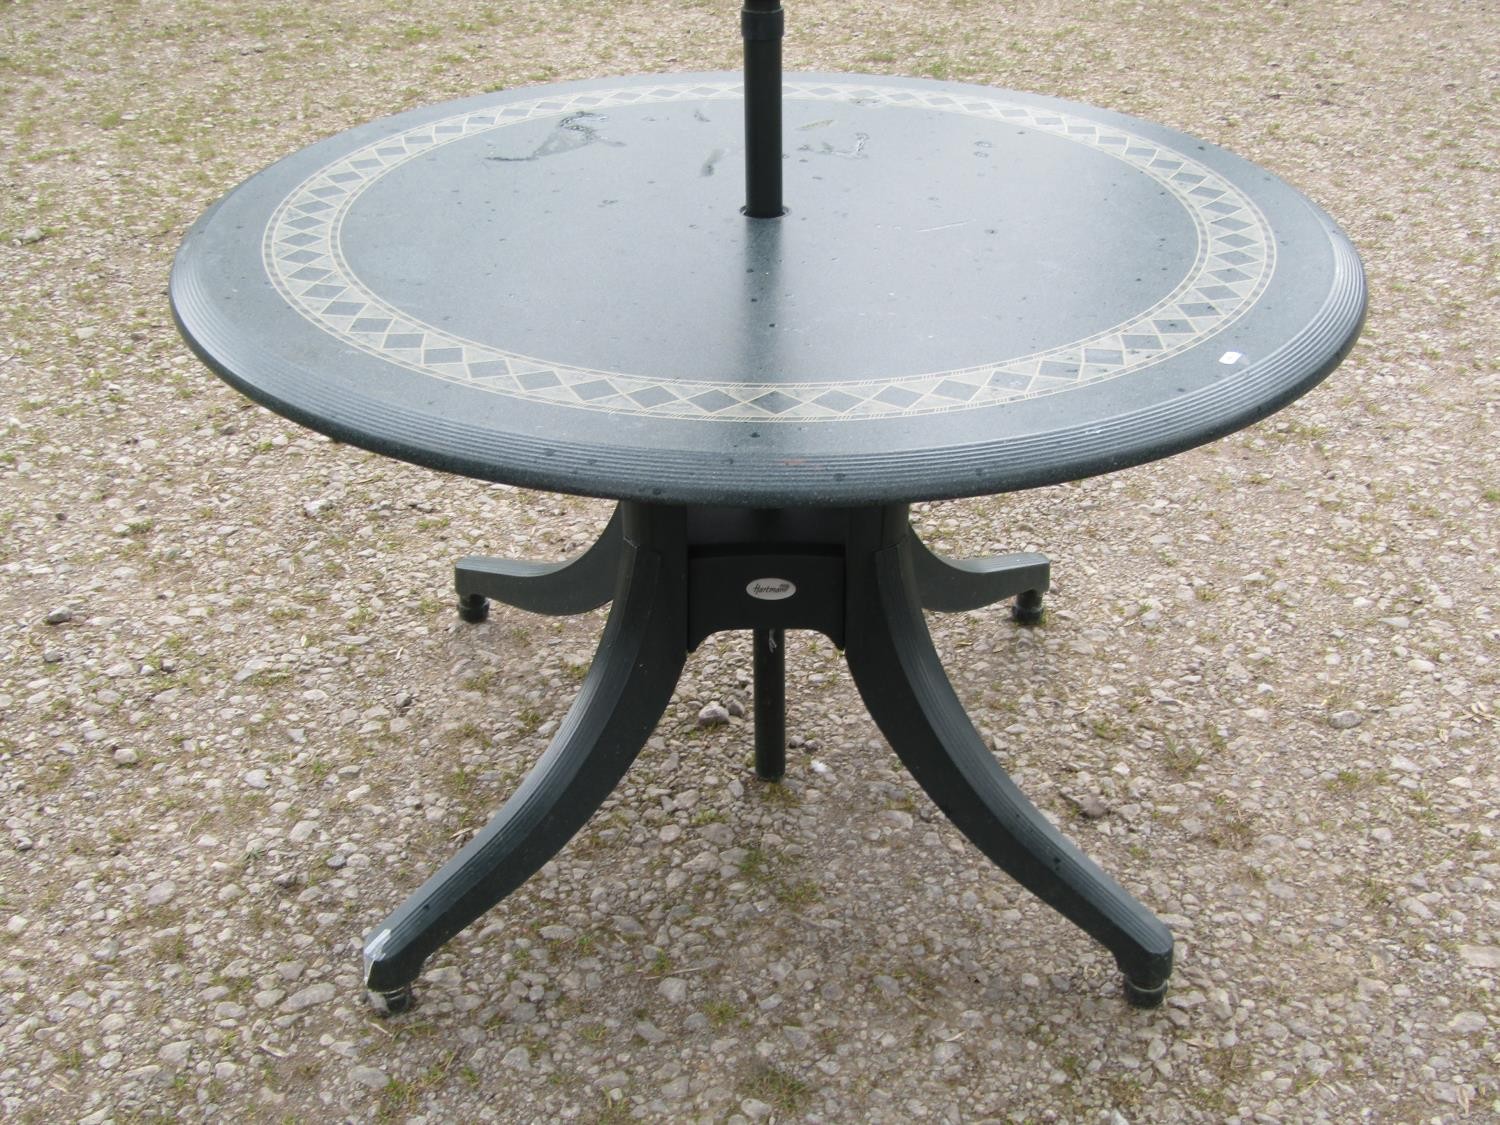 A moulded plastic patio set by Hartman consisting of a circular top table, 120 cm diameter raised on - Image 2 of 7